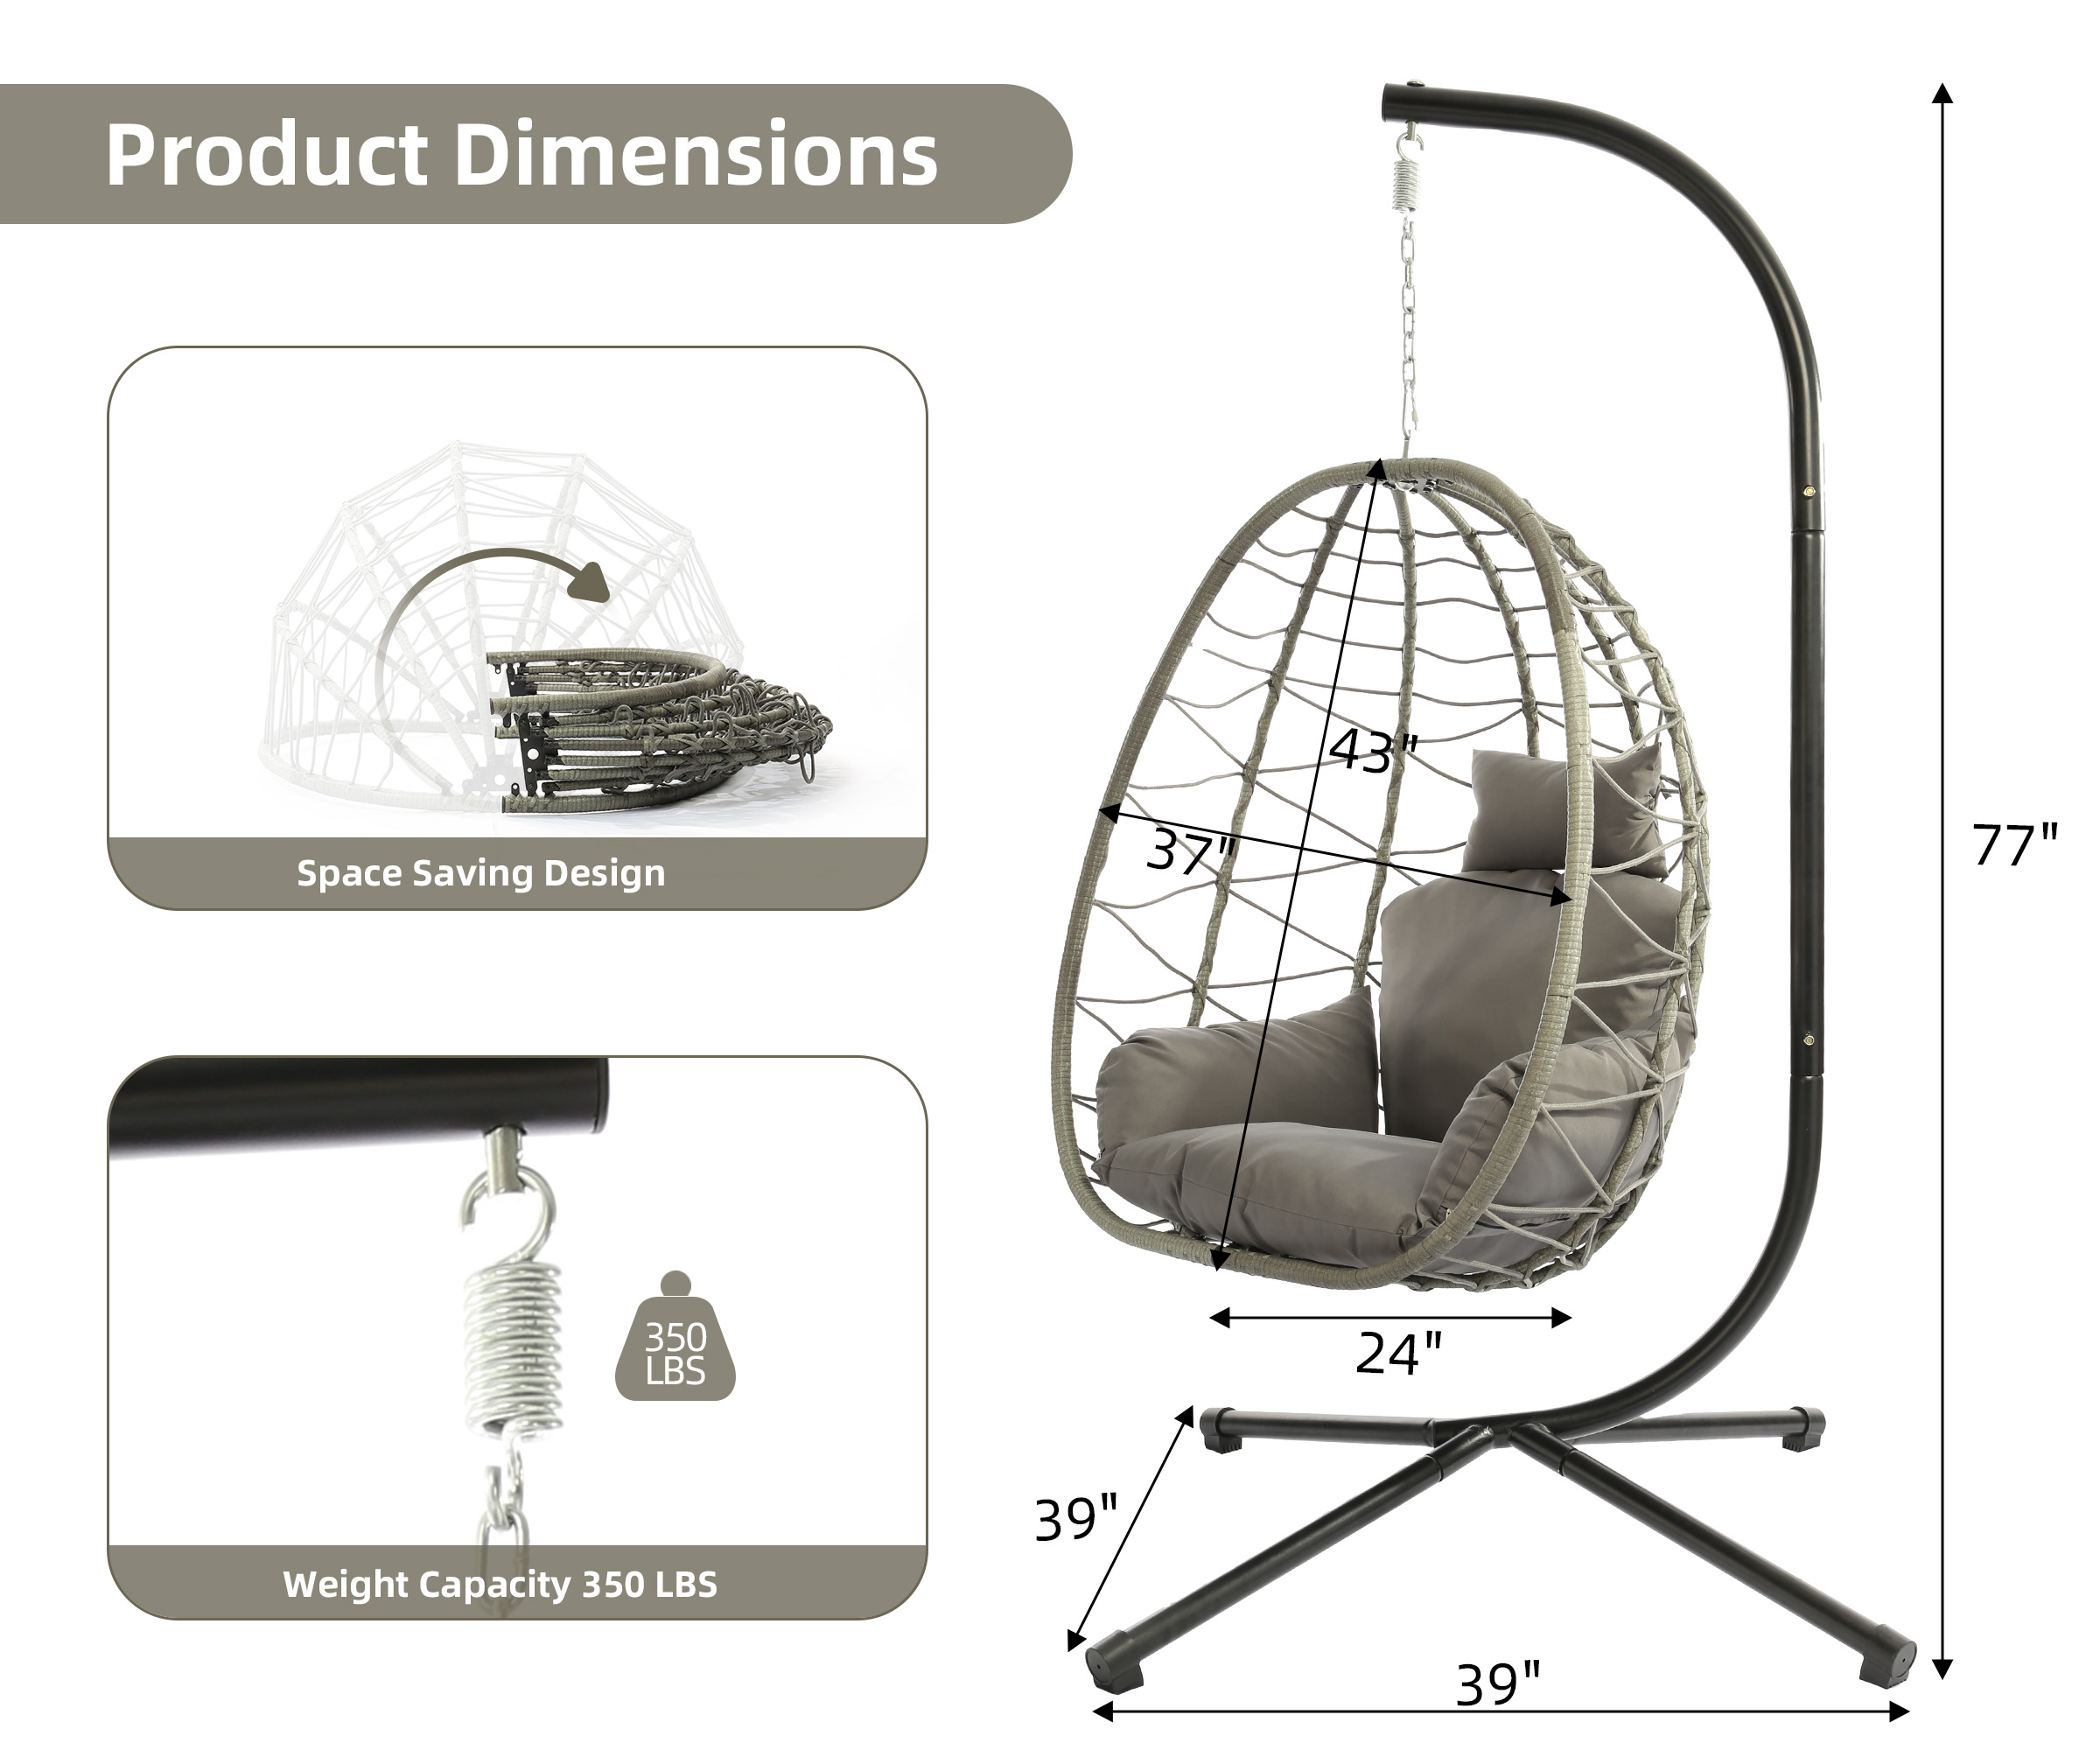 Bifanuo Indoor/Outdoor Wicker Swing Egg Chair Hammock Hanging Chair Nest Basket with Stand, UV Resistant Removable & Washable Cushions,350LB Capacity for Bedroom, Balcony, Garden and Poolside (Grey) - image 3 of 6